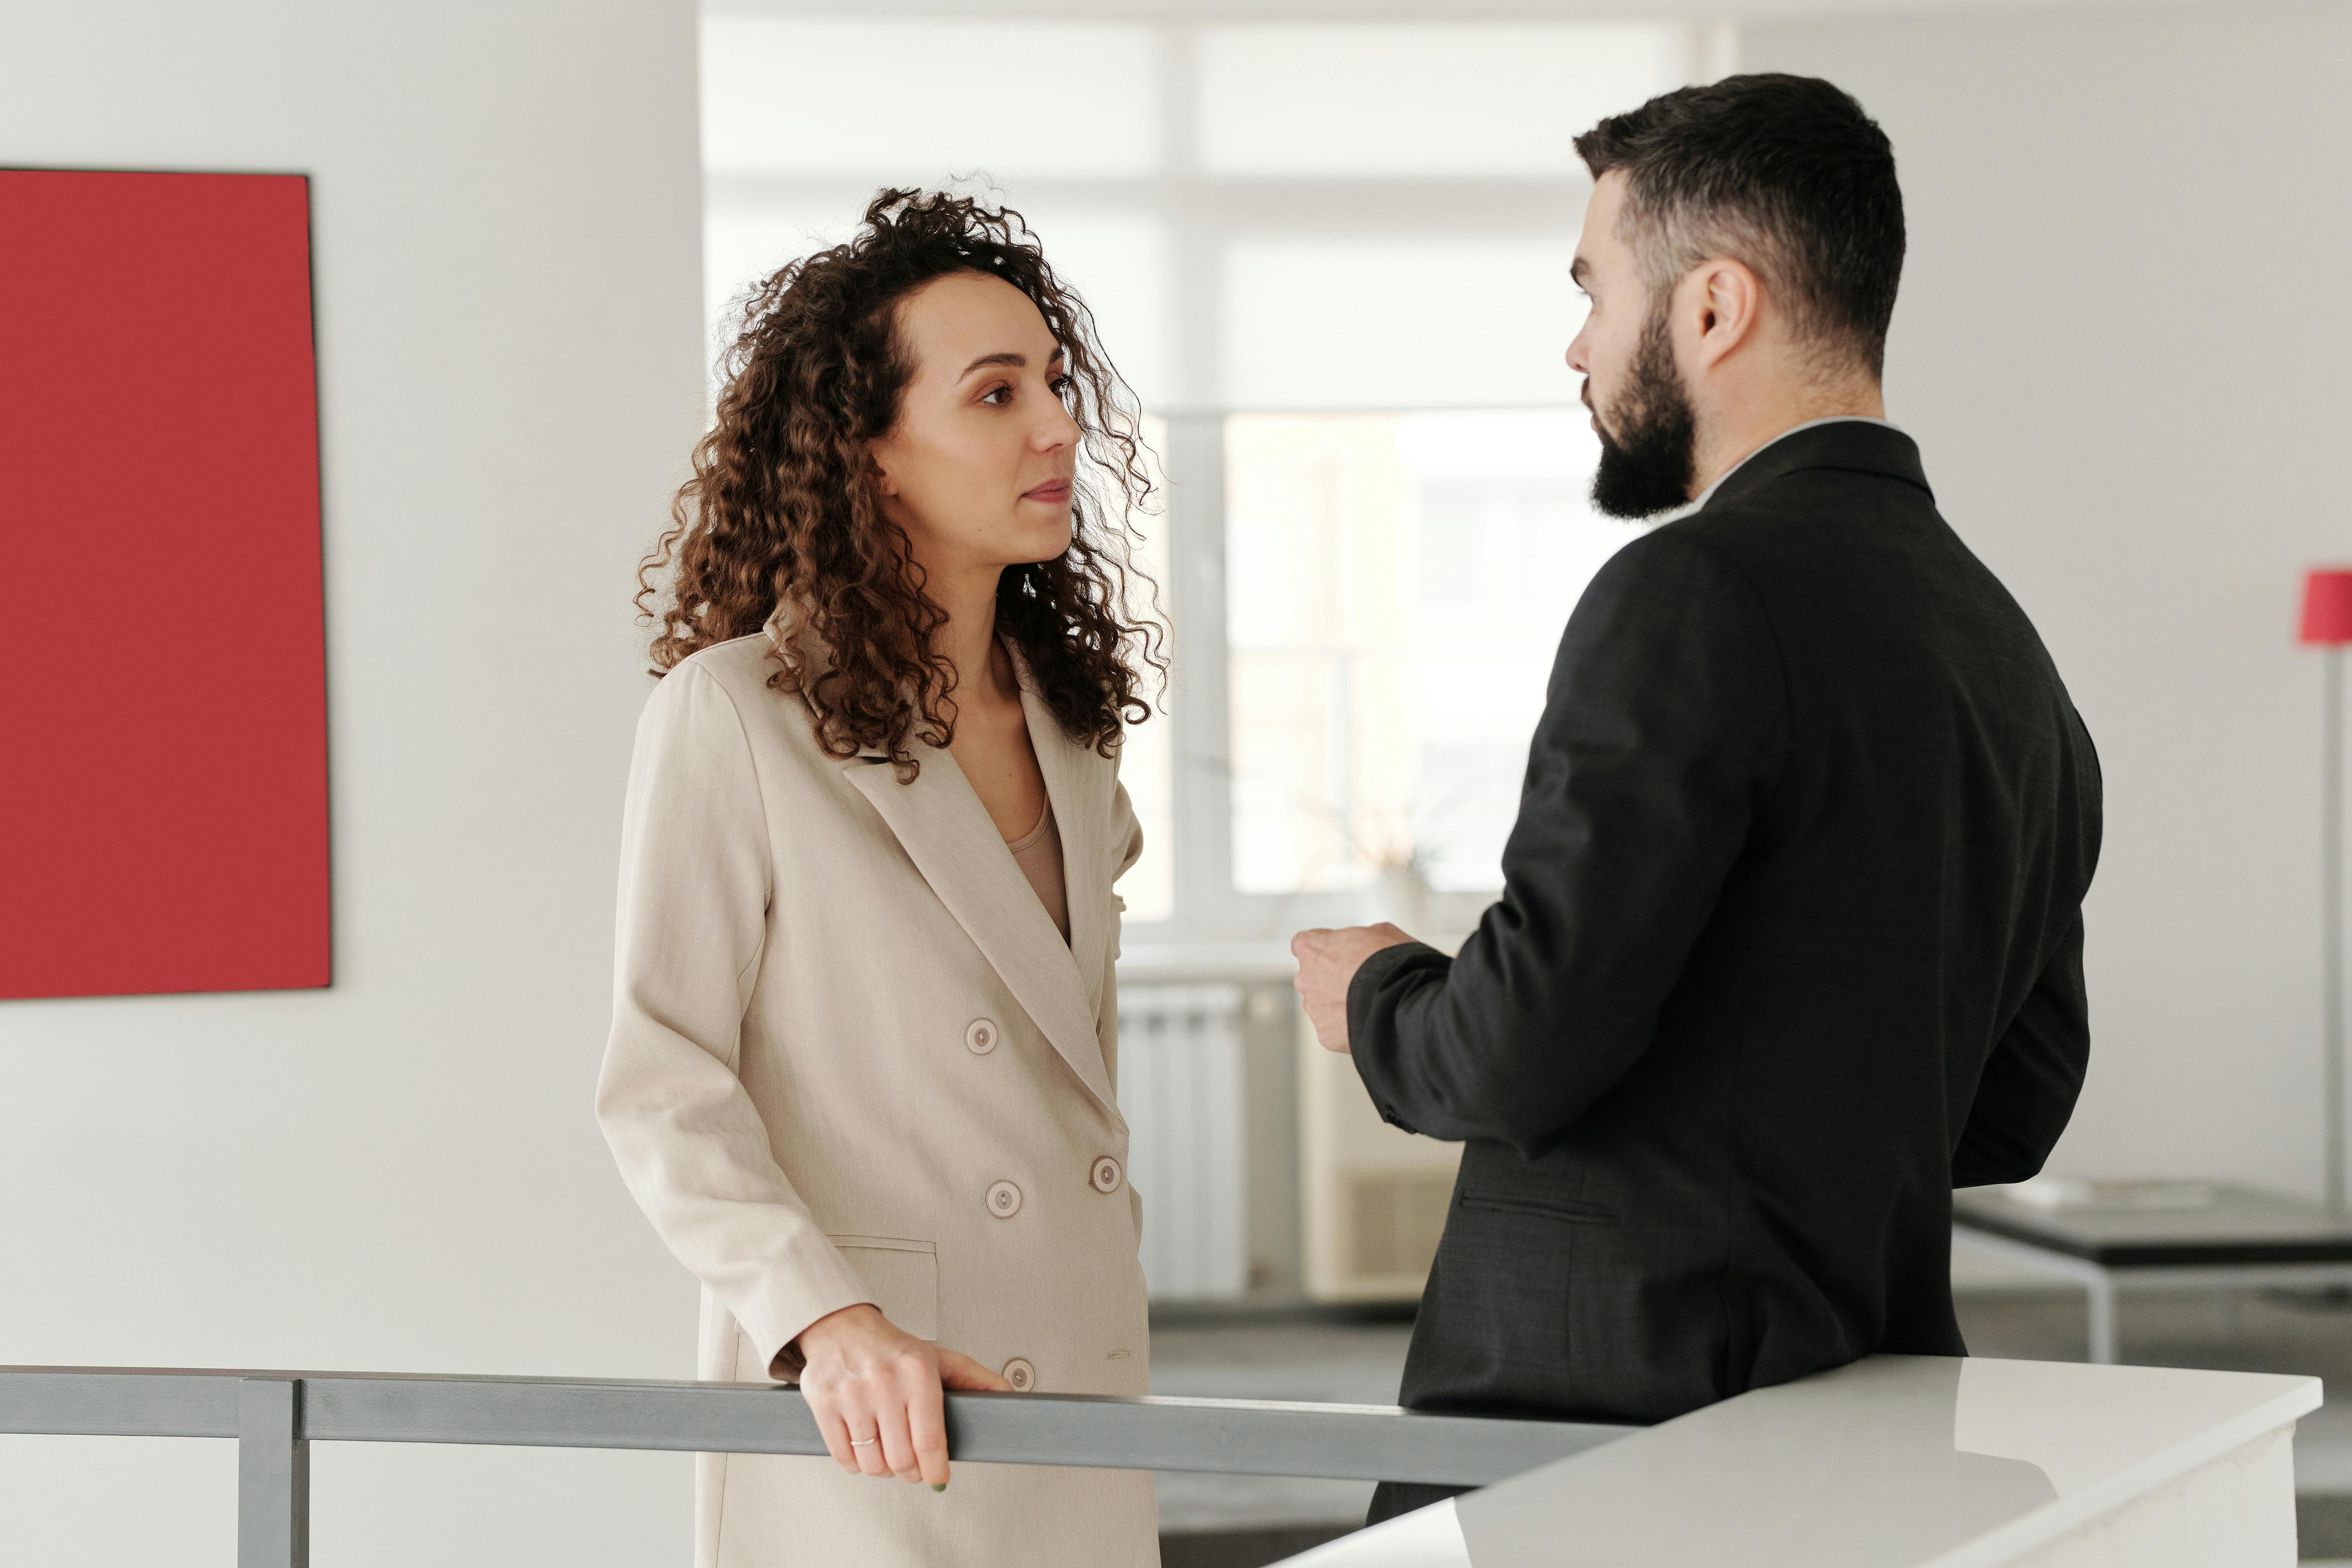 Woman and manager talking | Source: Pexels